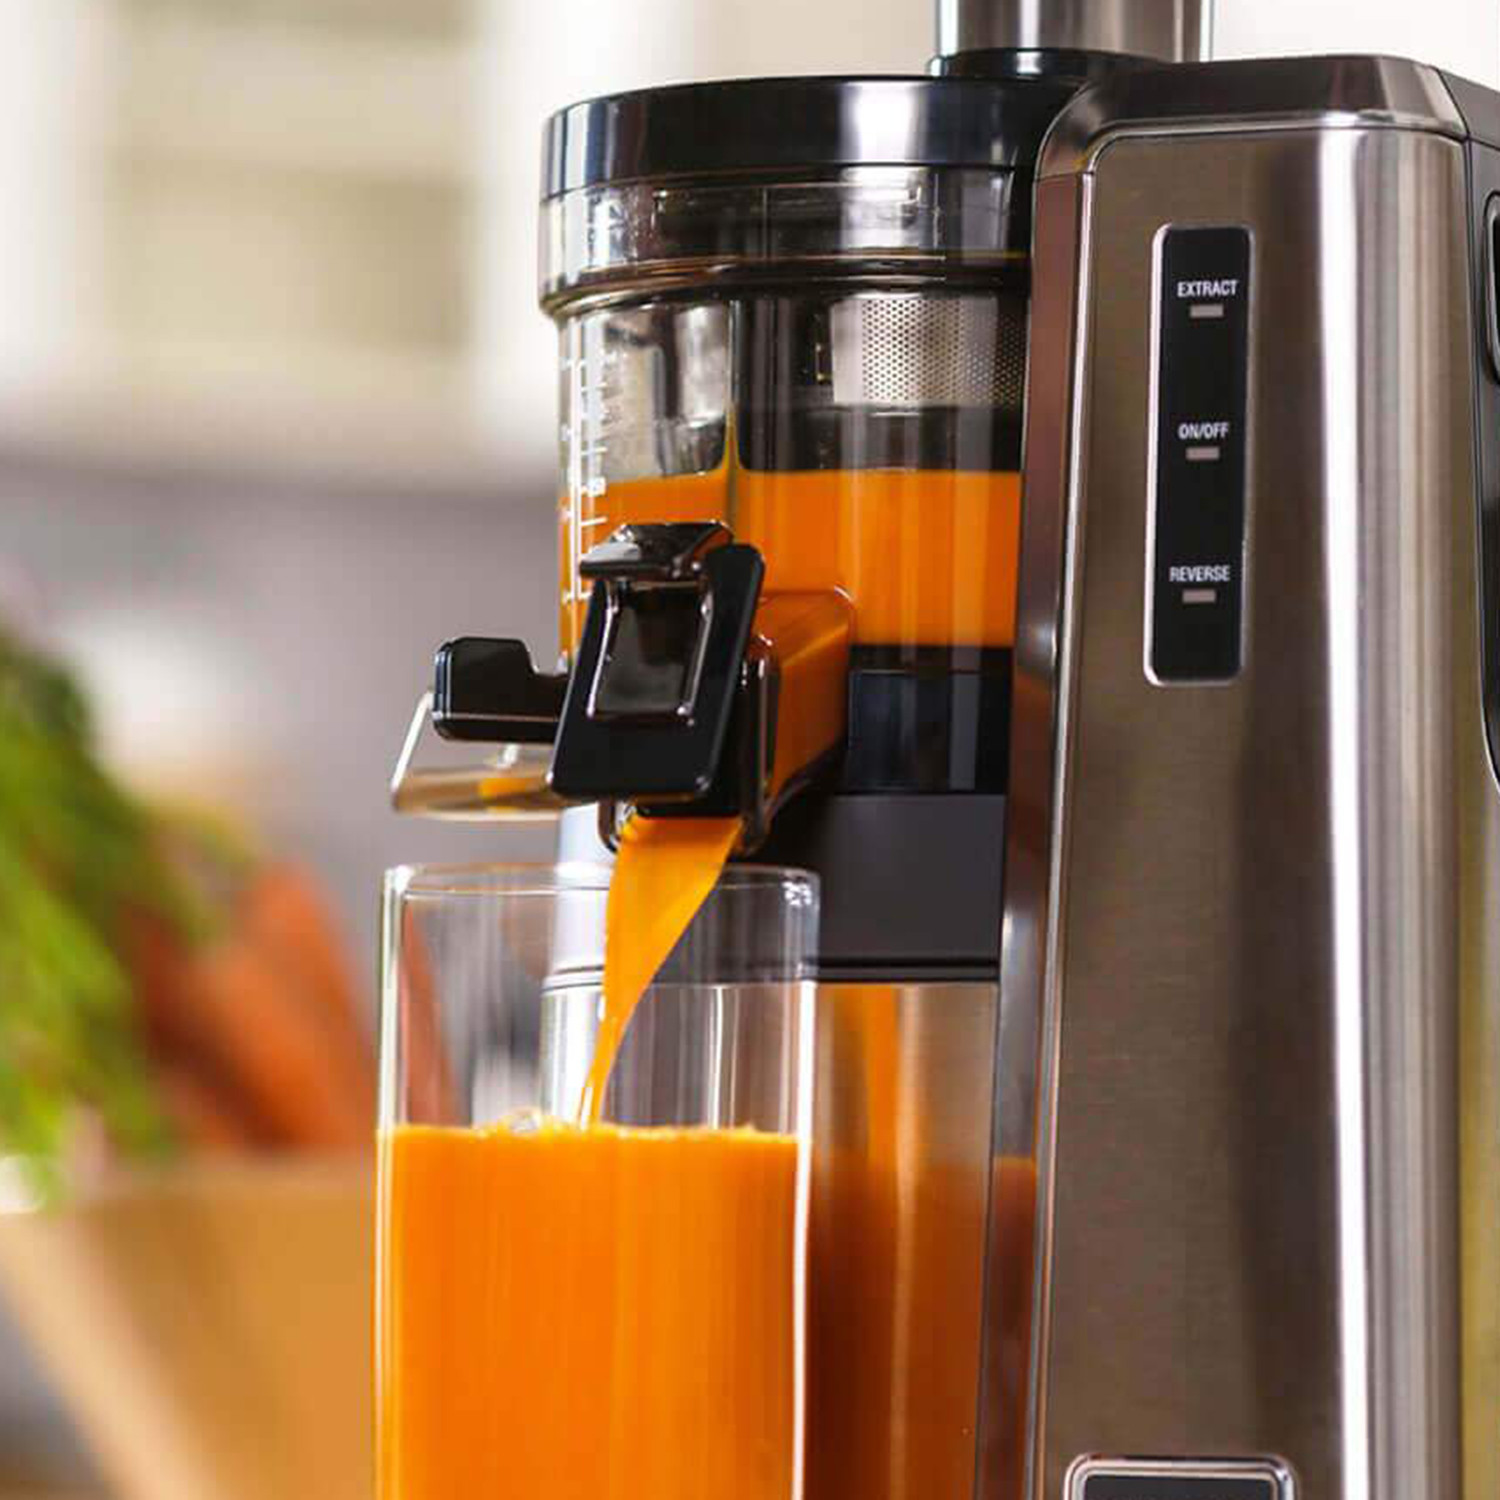 How To Make Carrot Juice With A Juicer